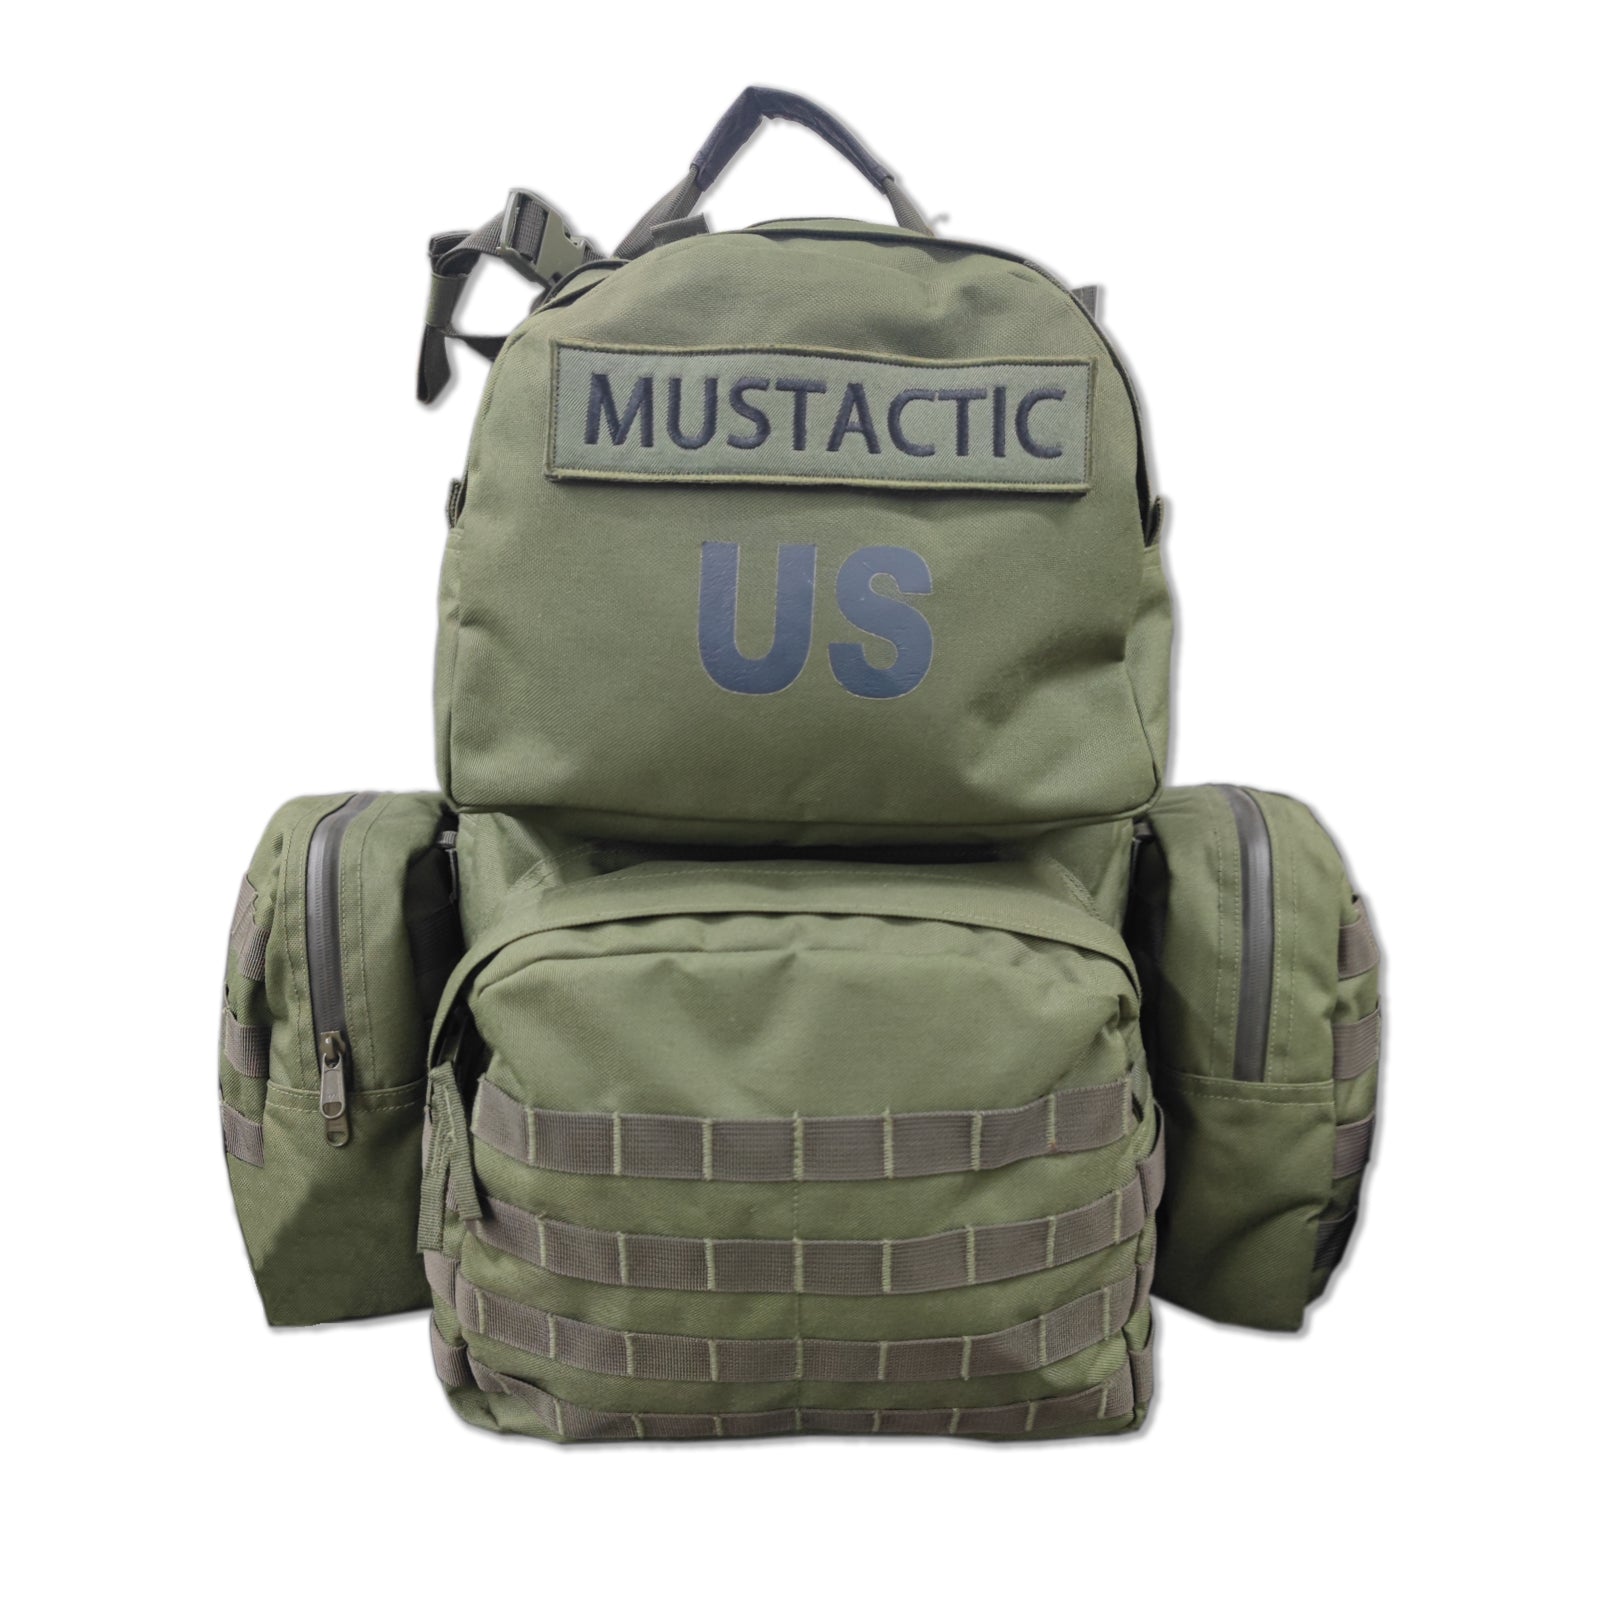 MUSTACTIC Military MOLLE 2 Medium Backpack Army Rucksack Tactical Assault Pack with Frame Multicam - AKmax Military